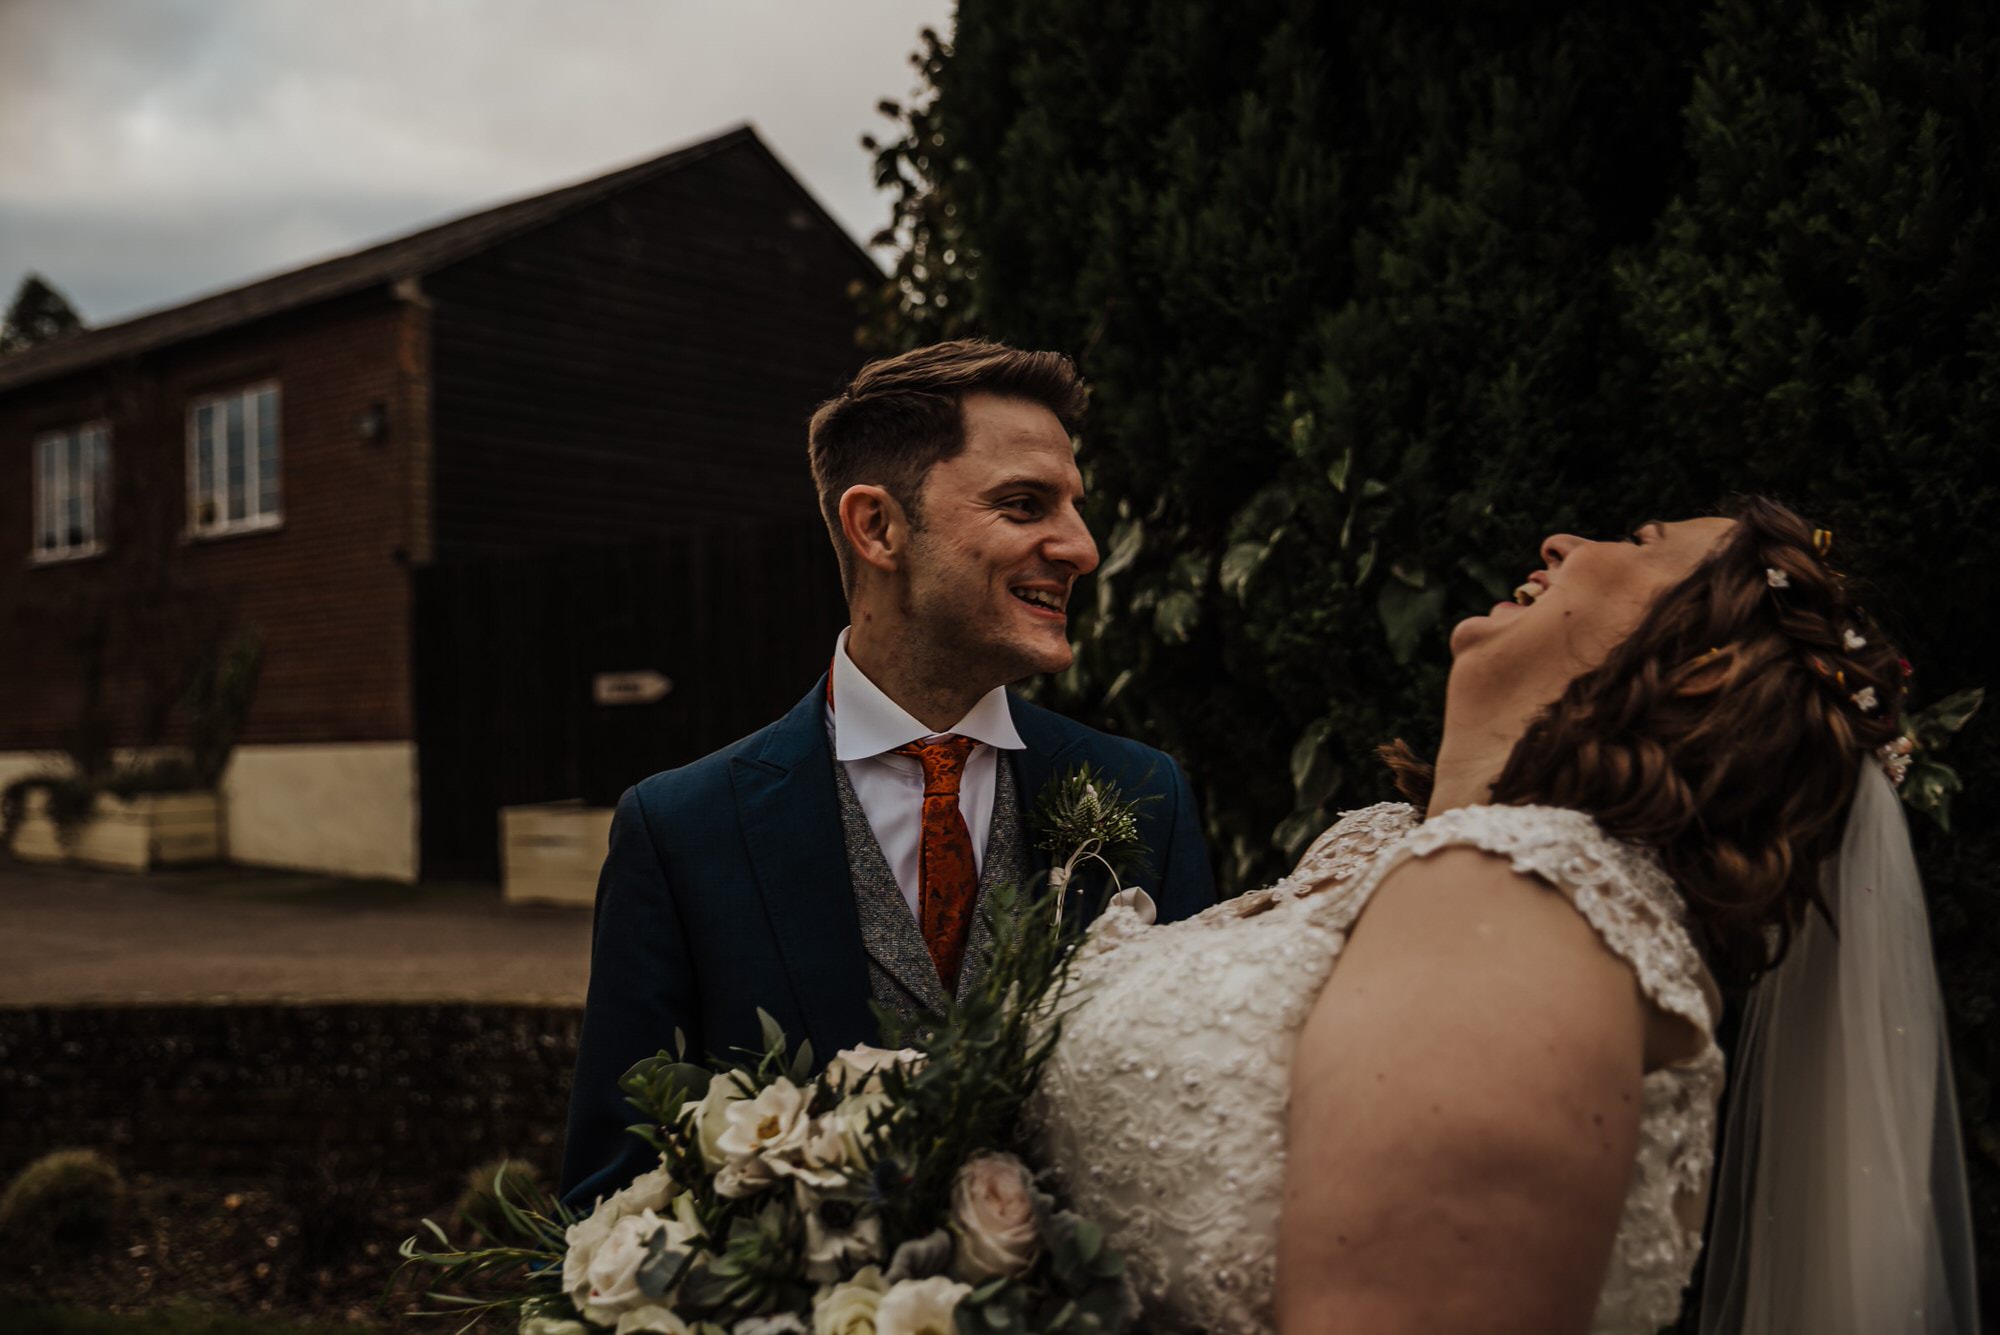 Groom and bride after the wedding ceremony Roshni photography The Milling Barn, Bluntswood Hall, Throcking wedding photographer